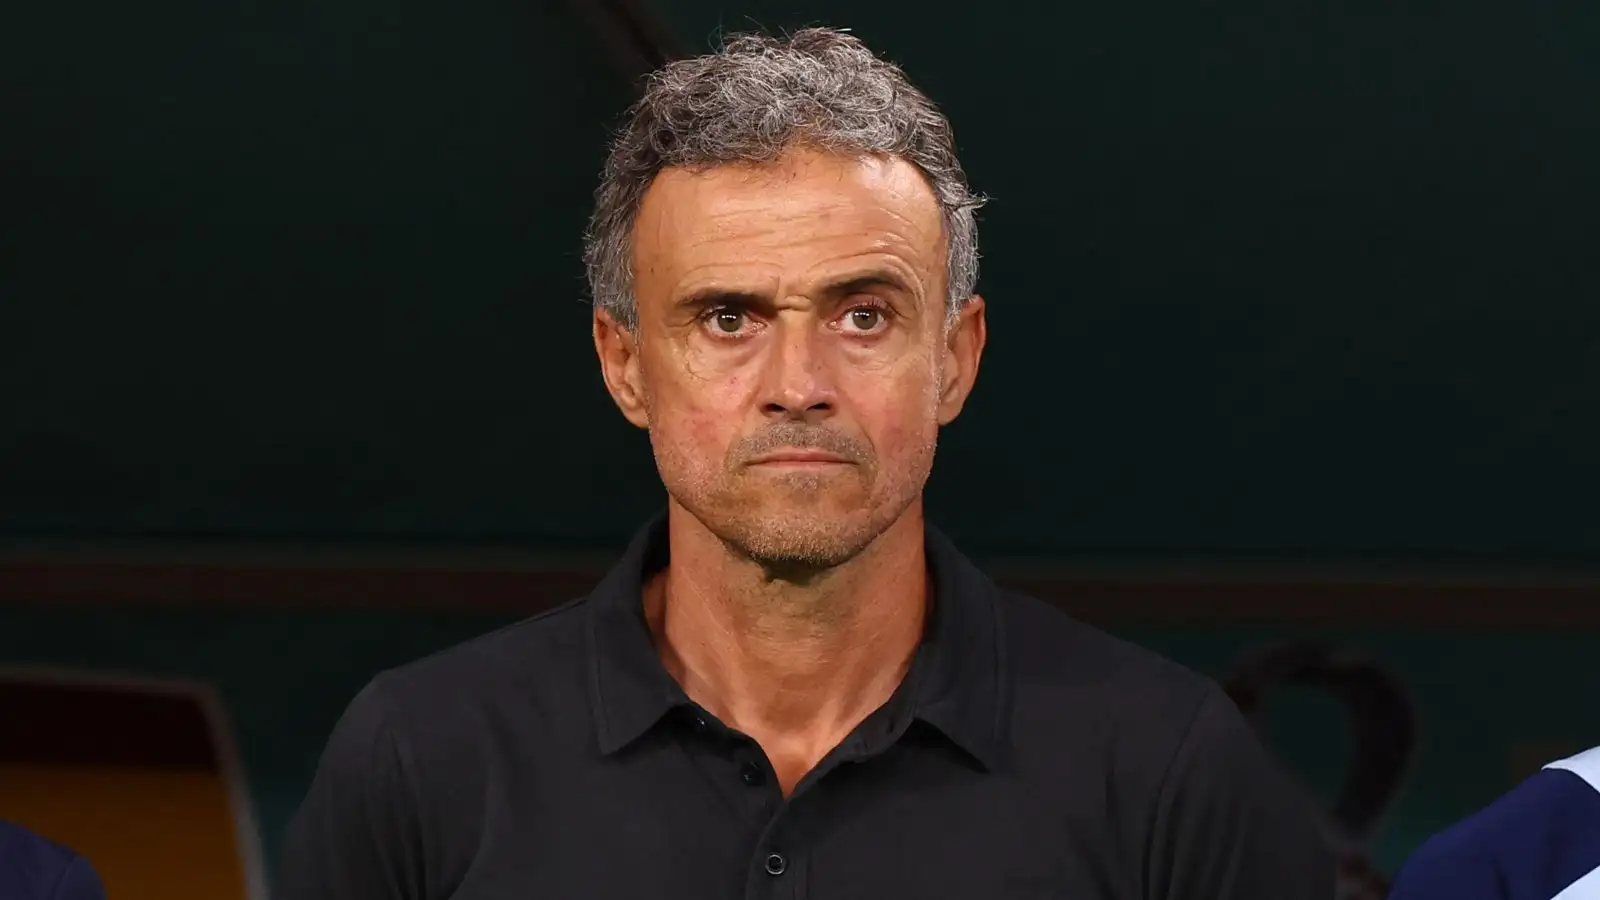 Luis Enrique in the dug out for the Spanish national team